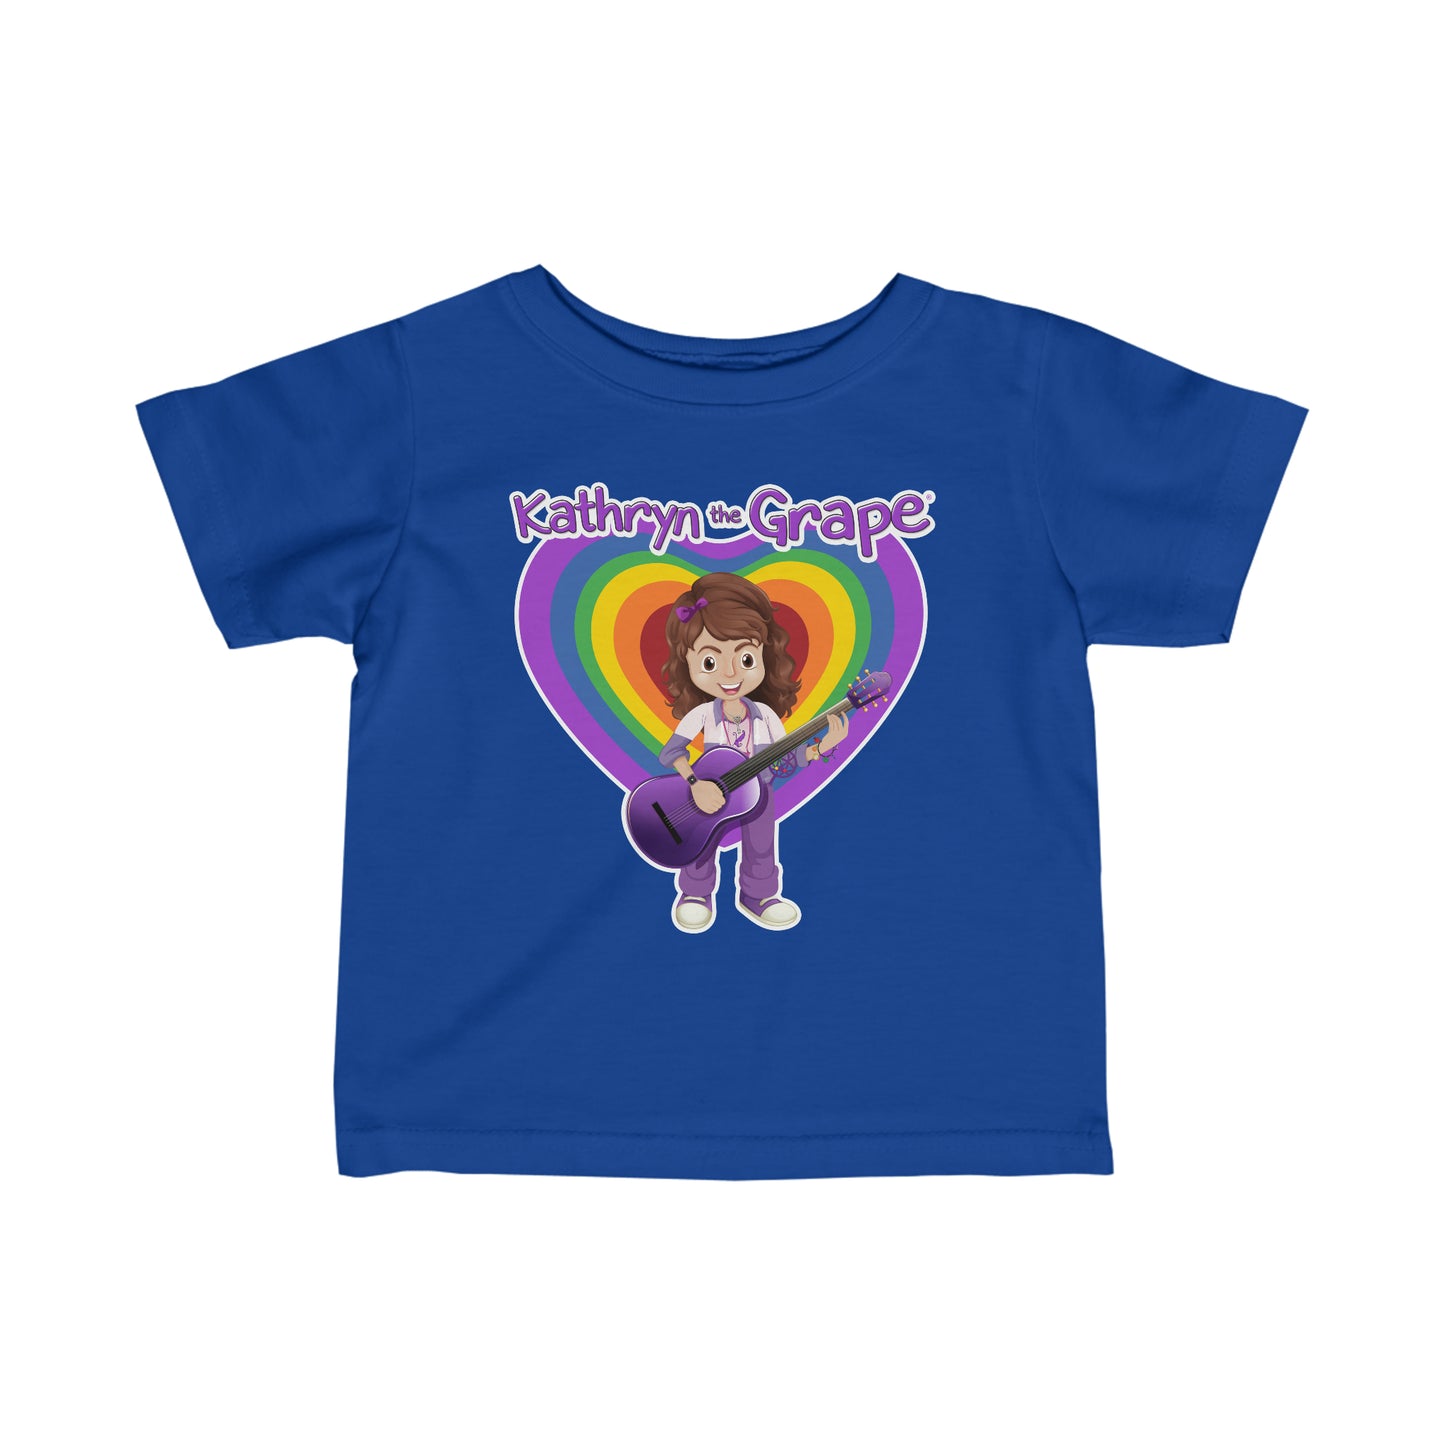 Kathryn the Grape with Guitar Infant Fine Jersey Tee